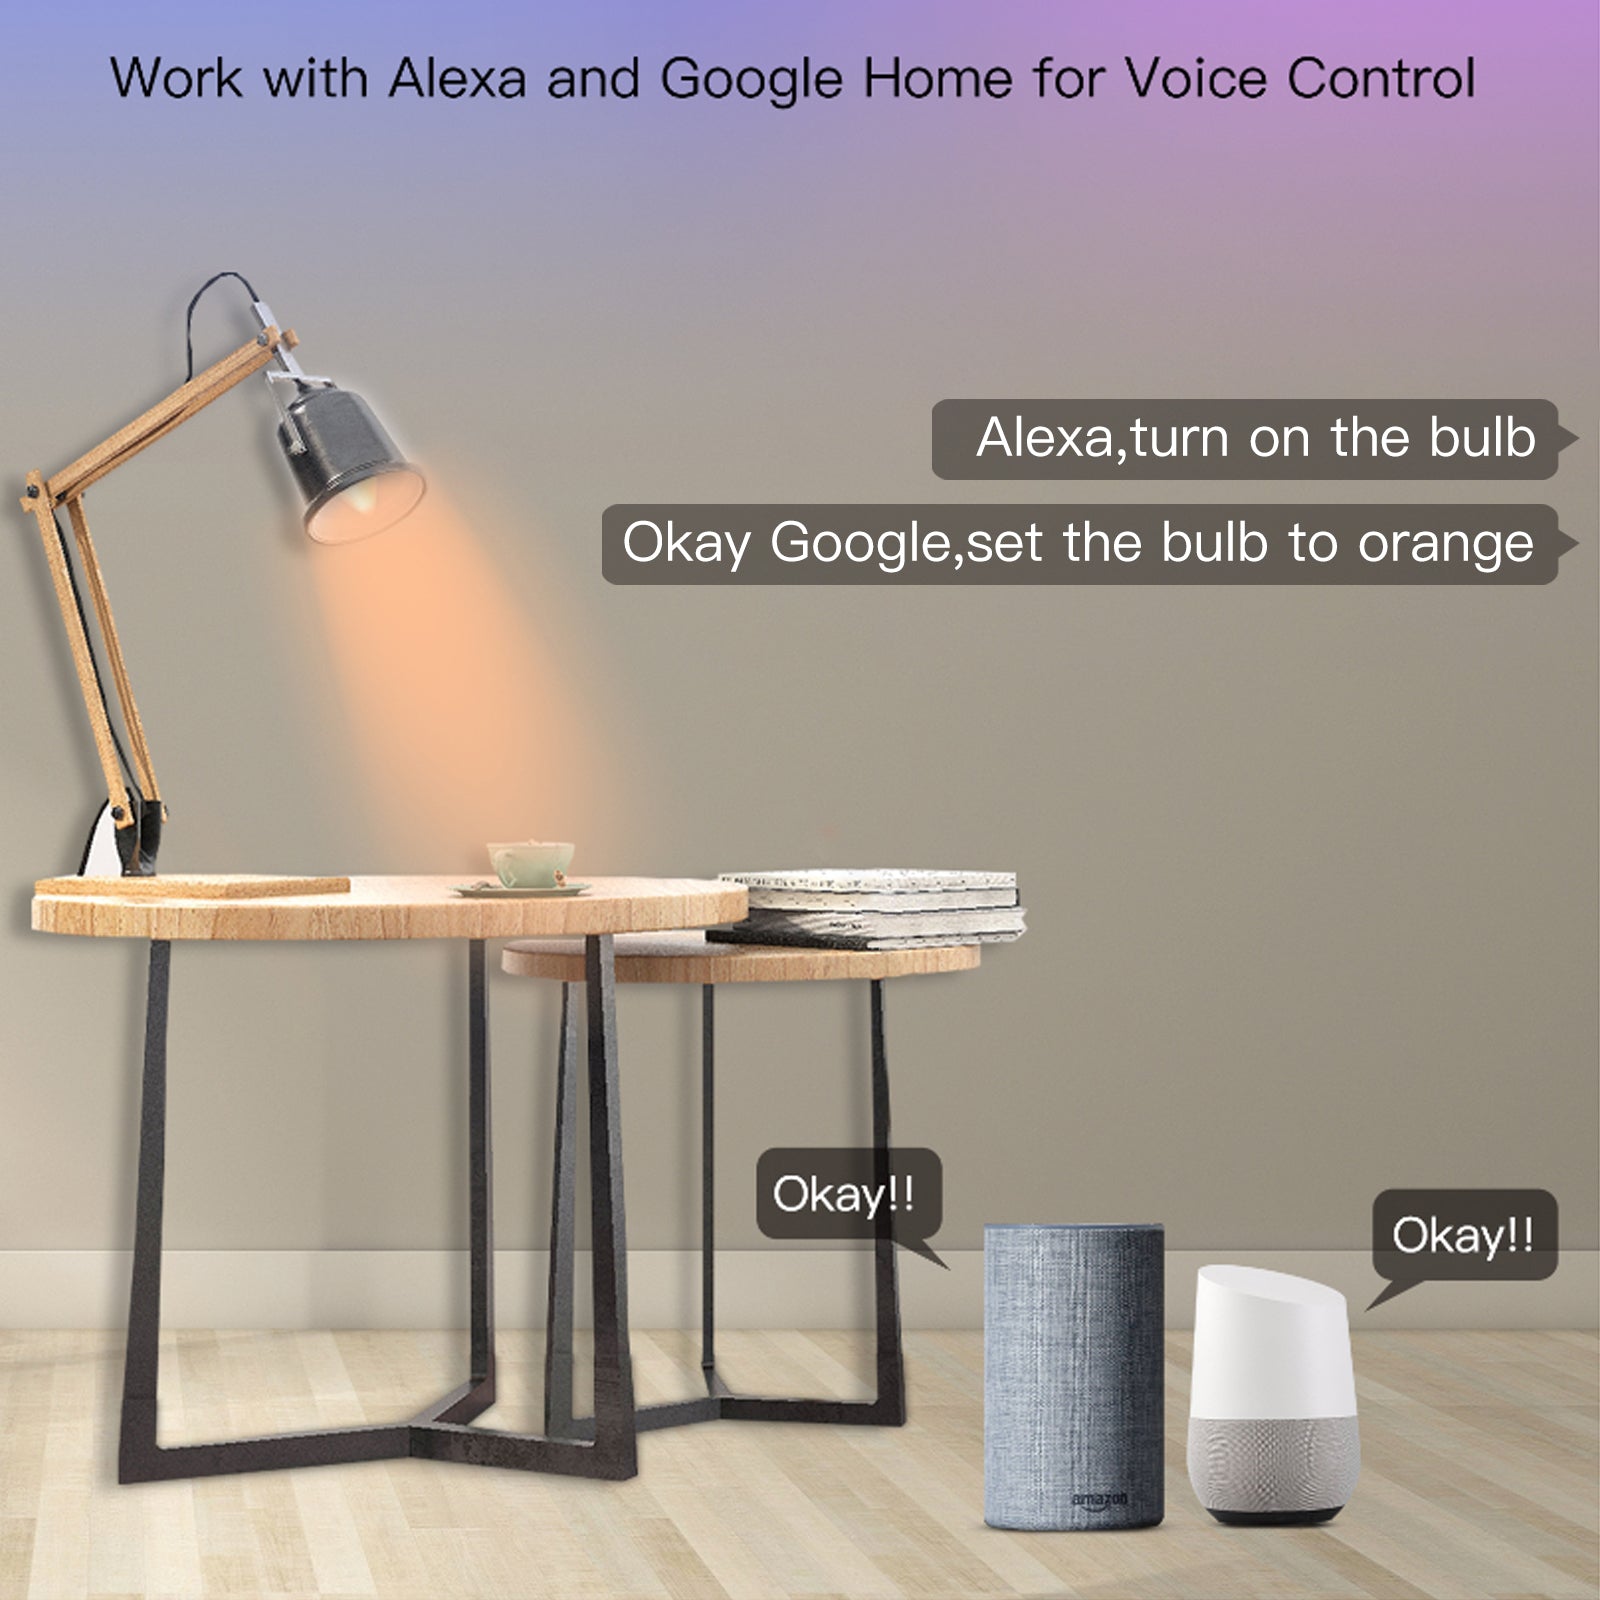 Work with Alexa and Google Home for Voice Control